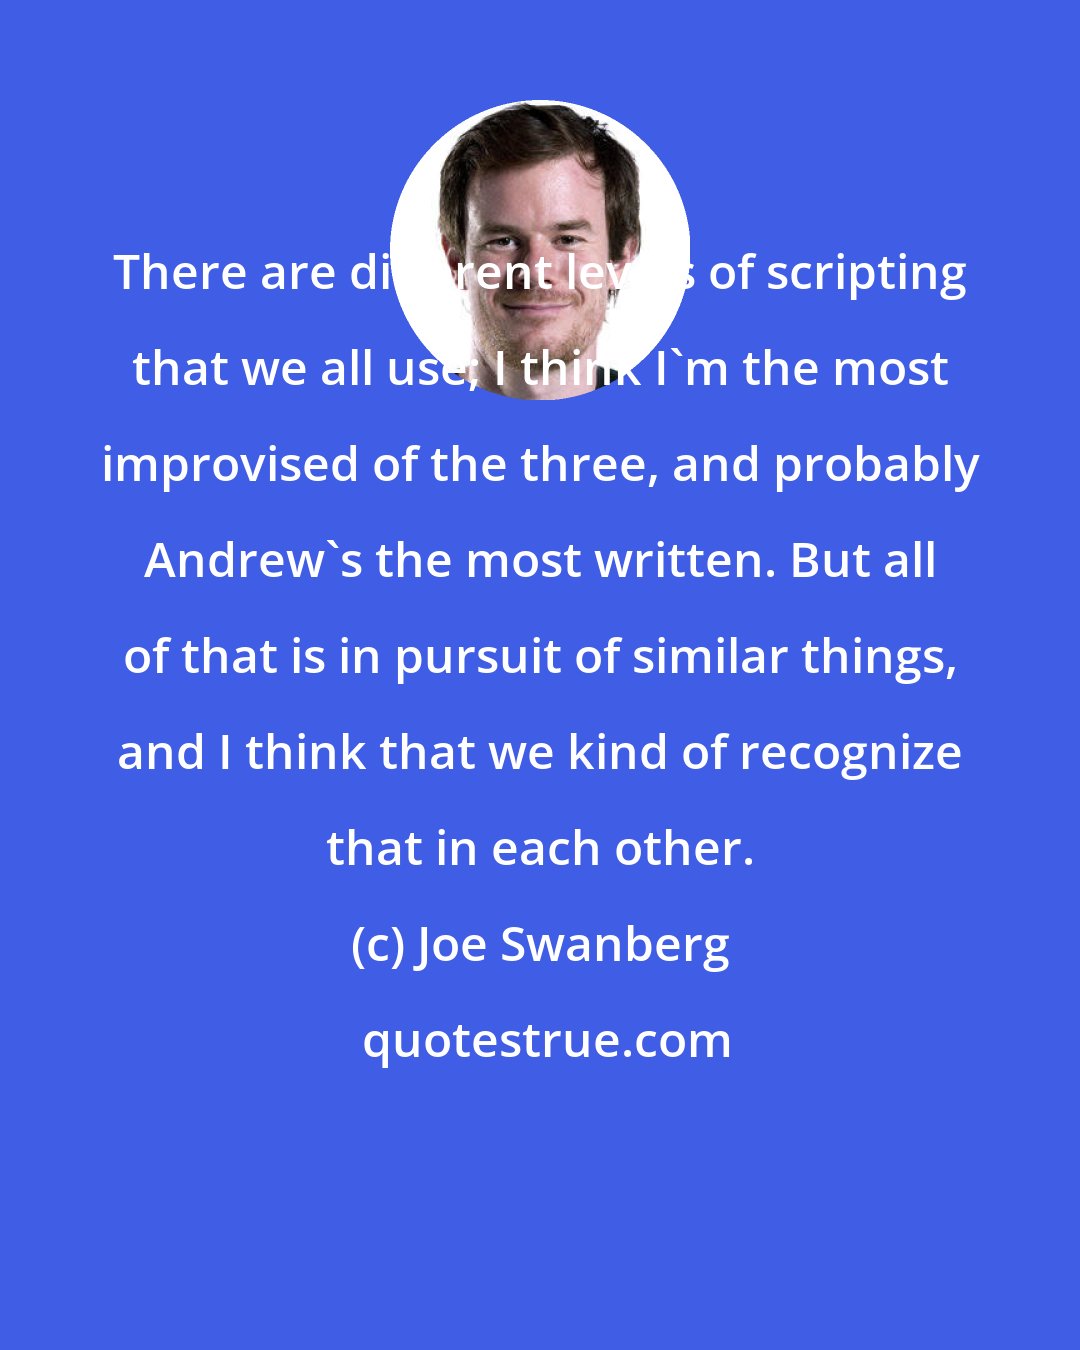 Joe Swanberg: There are different levels of scripting that we all use; I think I'm the most improvised of the three, and probably Andrew's the most written. But all of that is in pursuit of similar things, and I think that we kind of recognize that in each other.